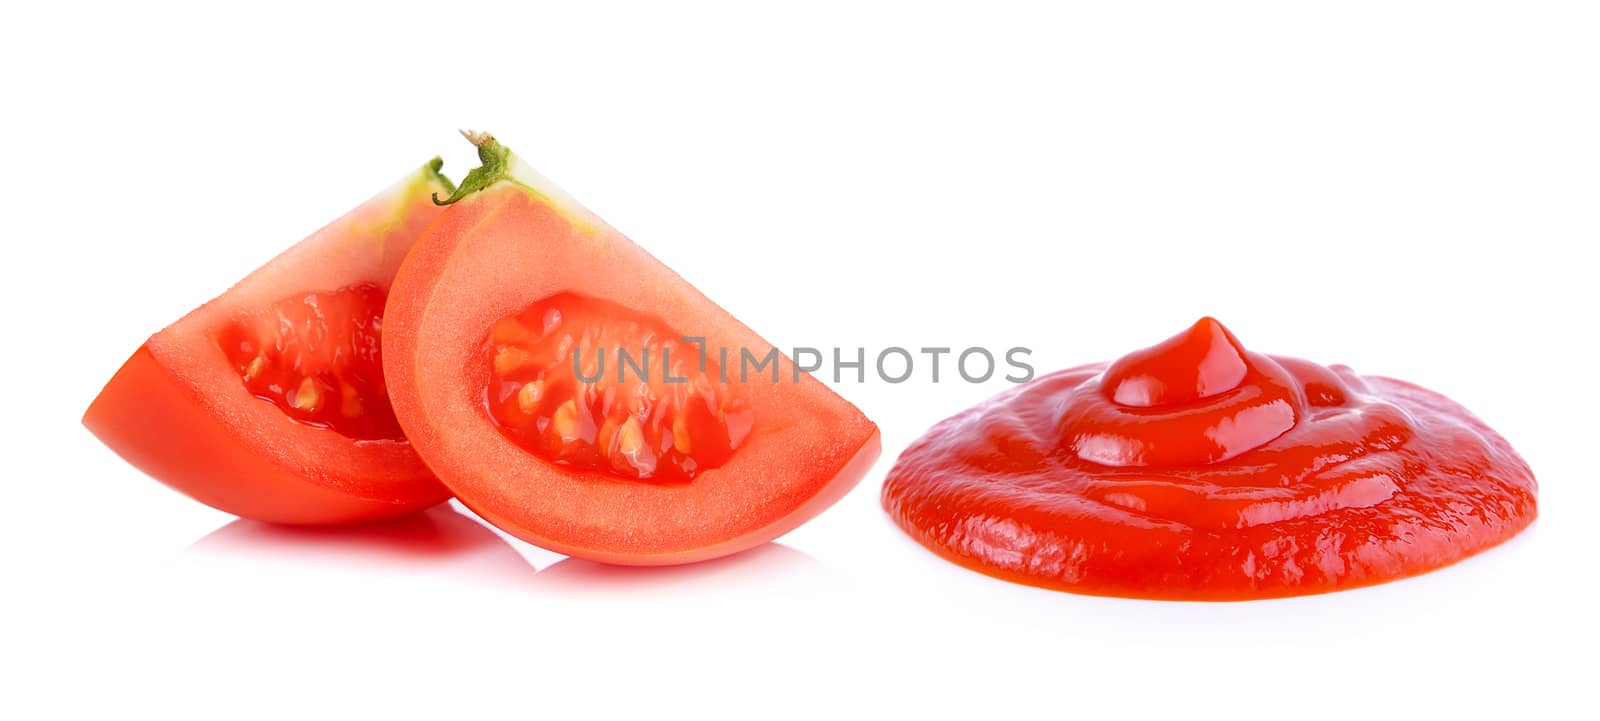 slice tomato and Tomato sauce on white background by sommai